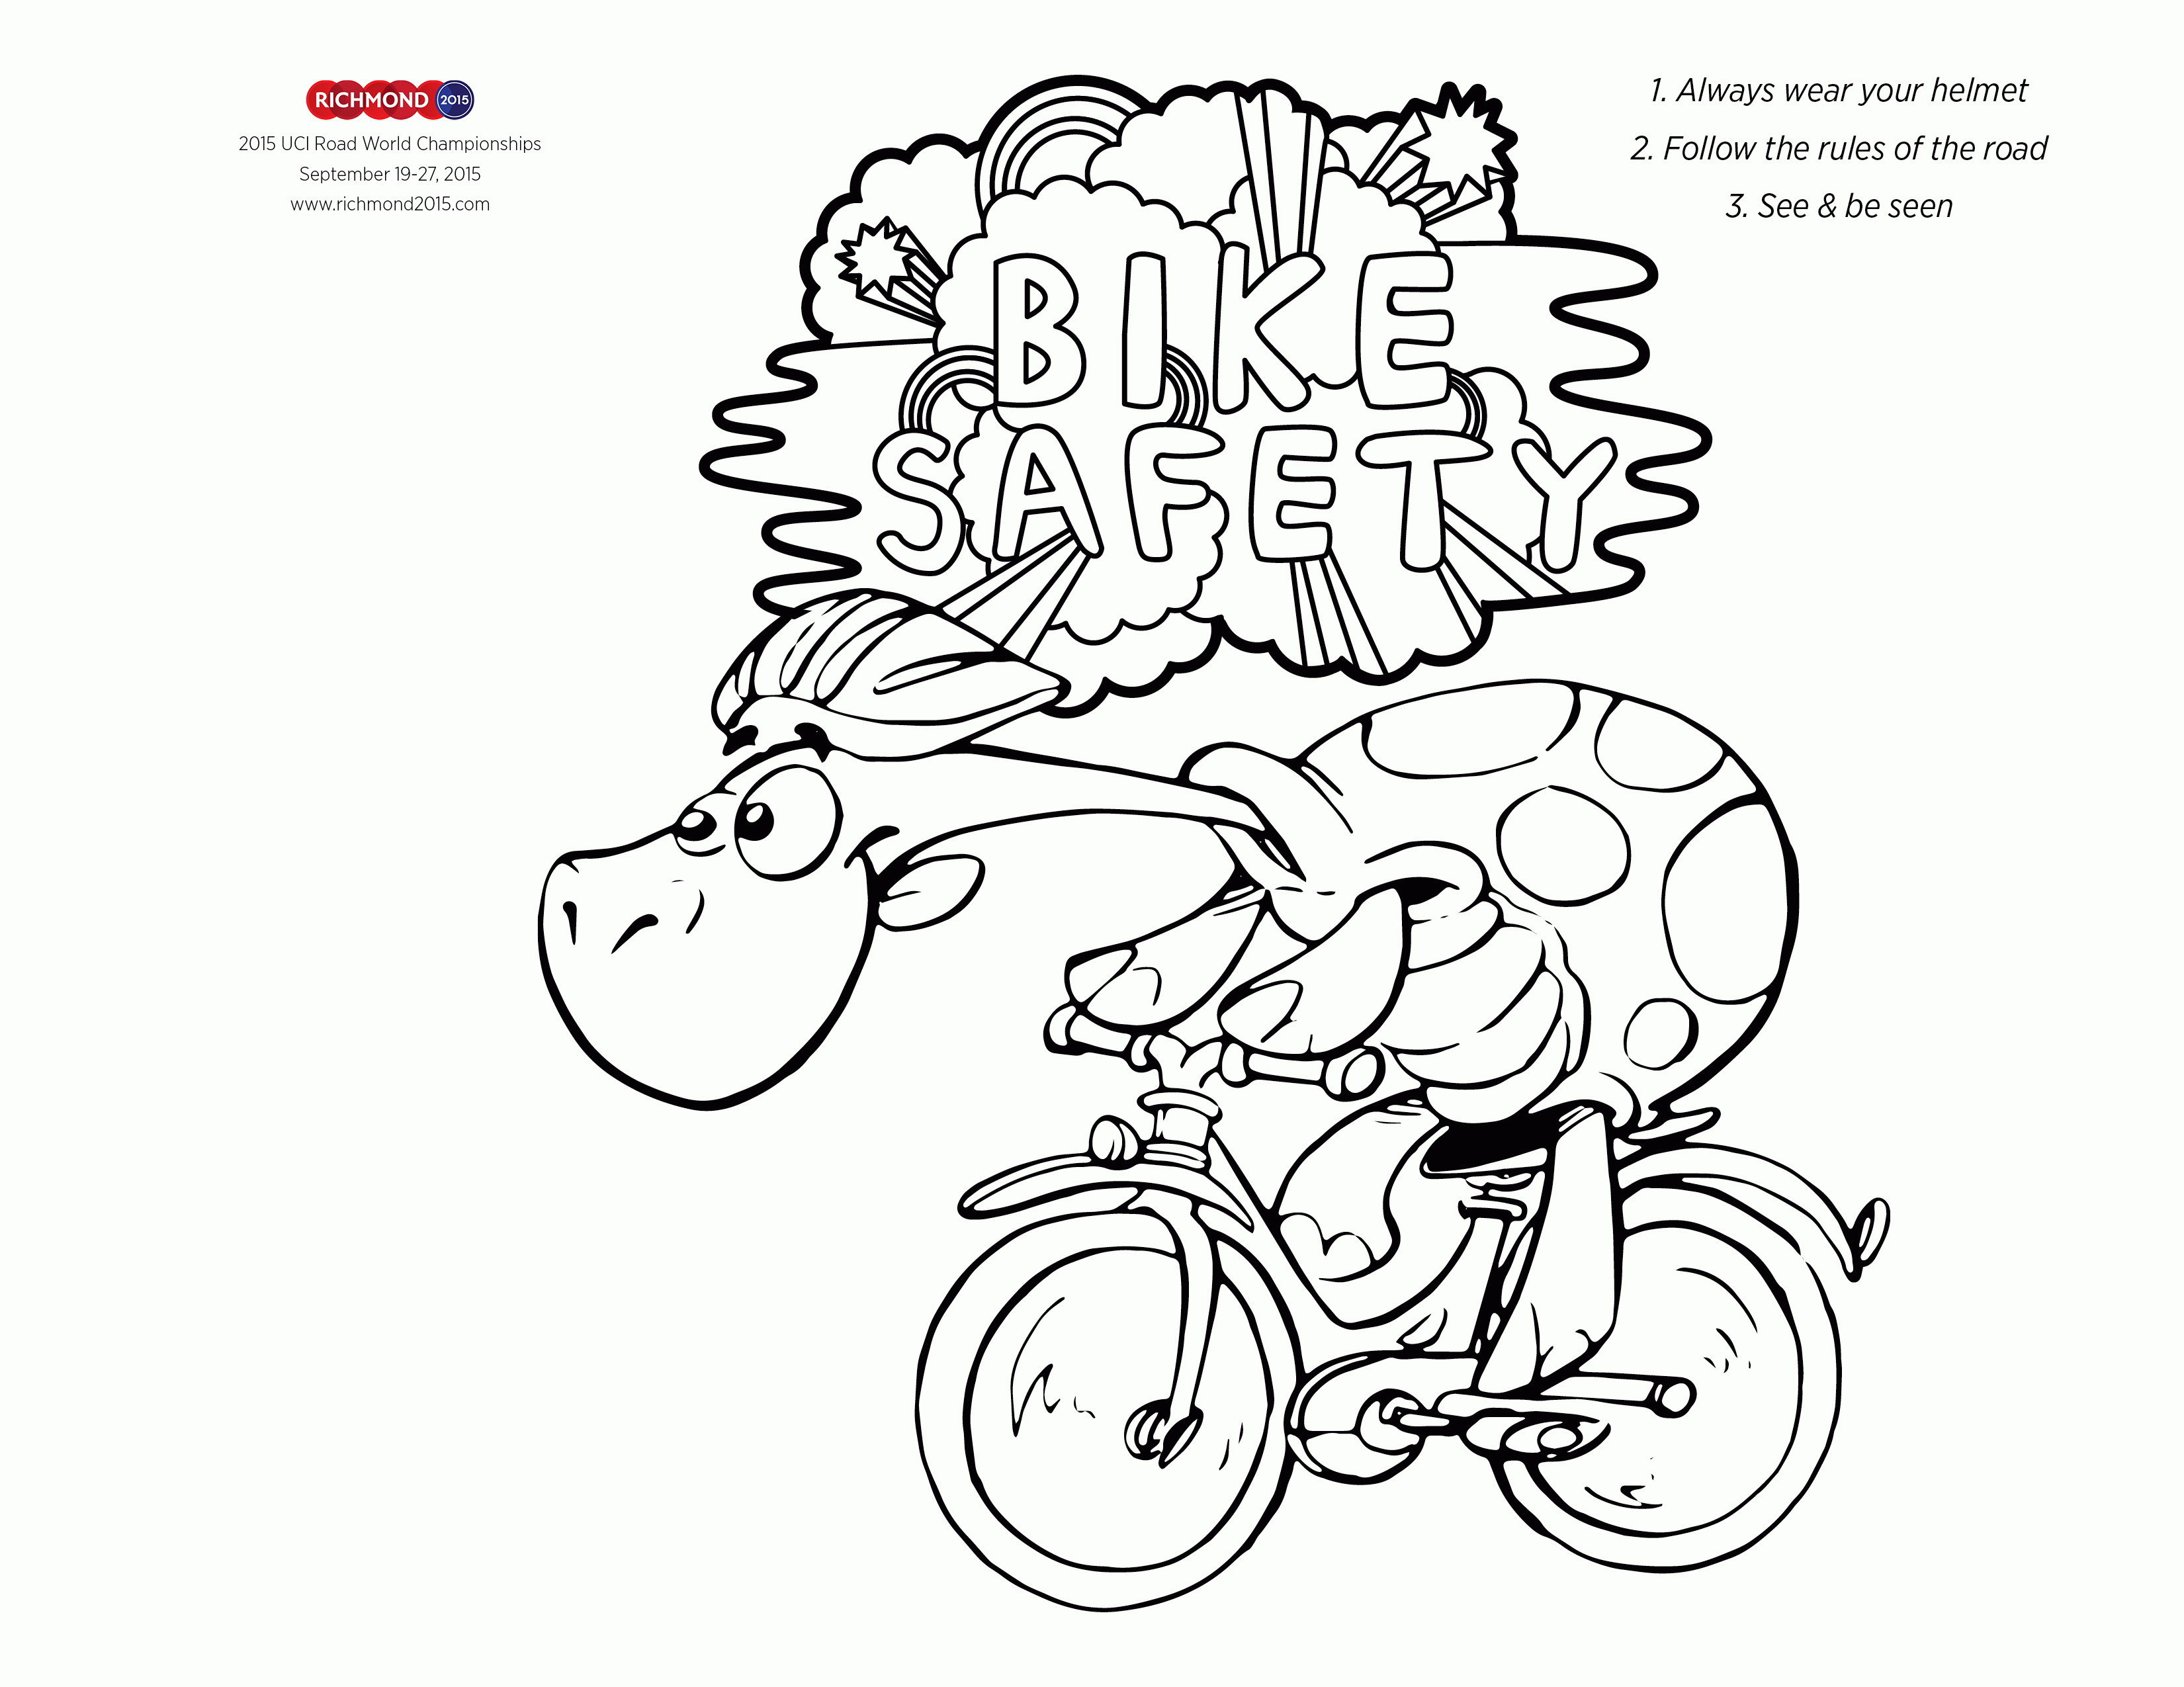 Bicycle Safety Coloring Page - Coloring Home